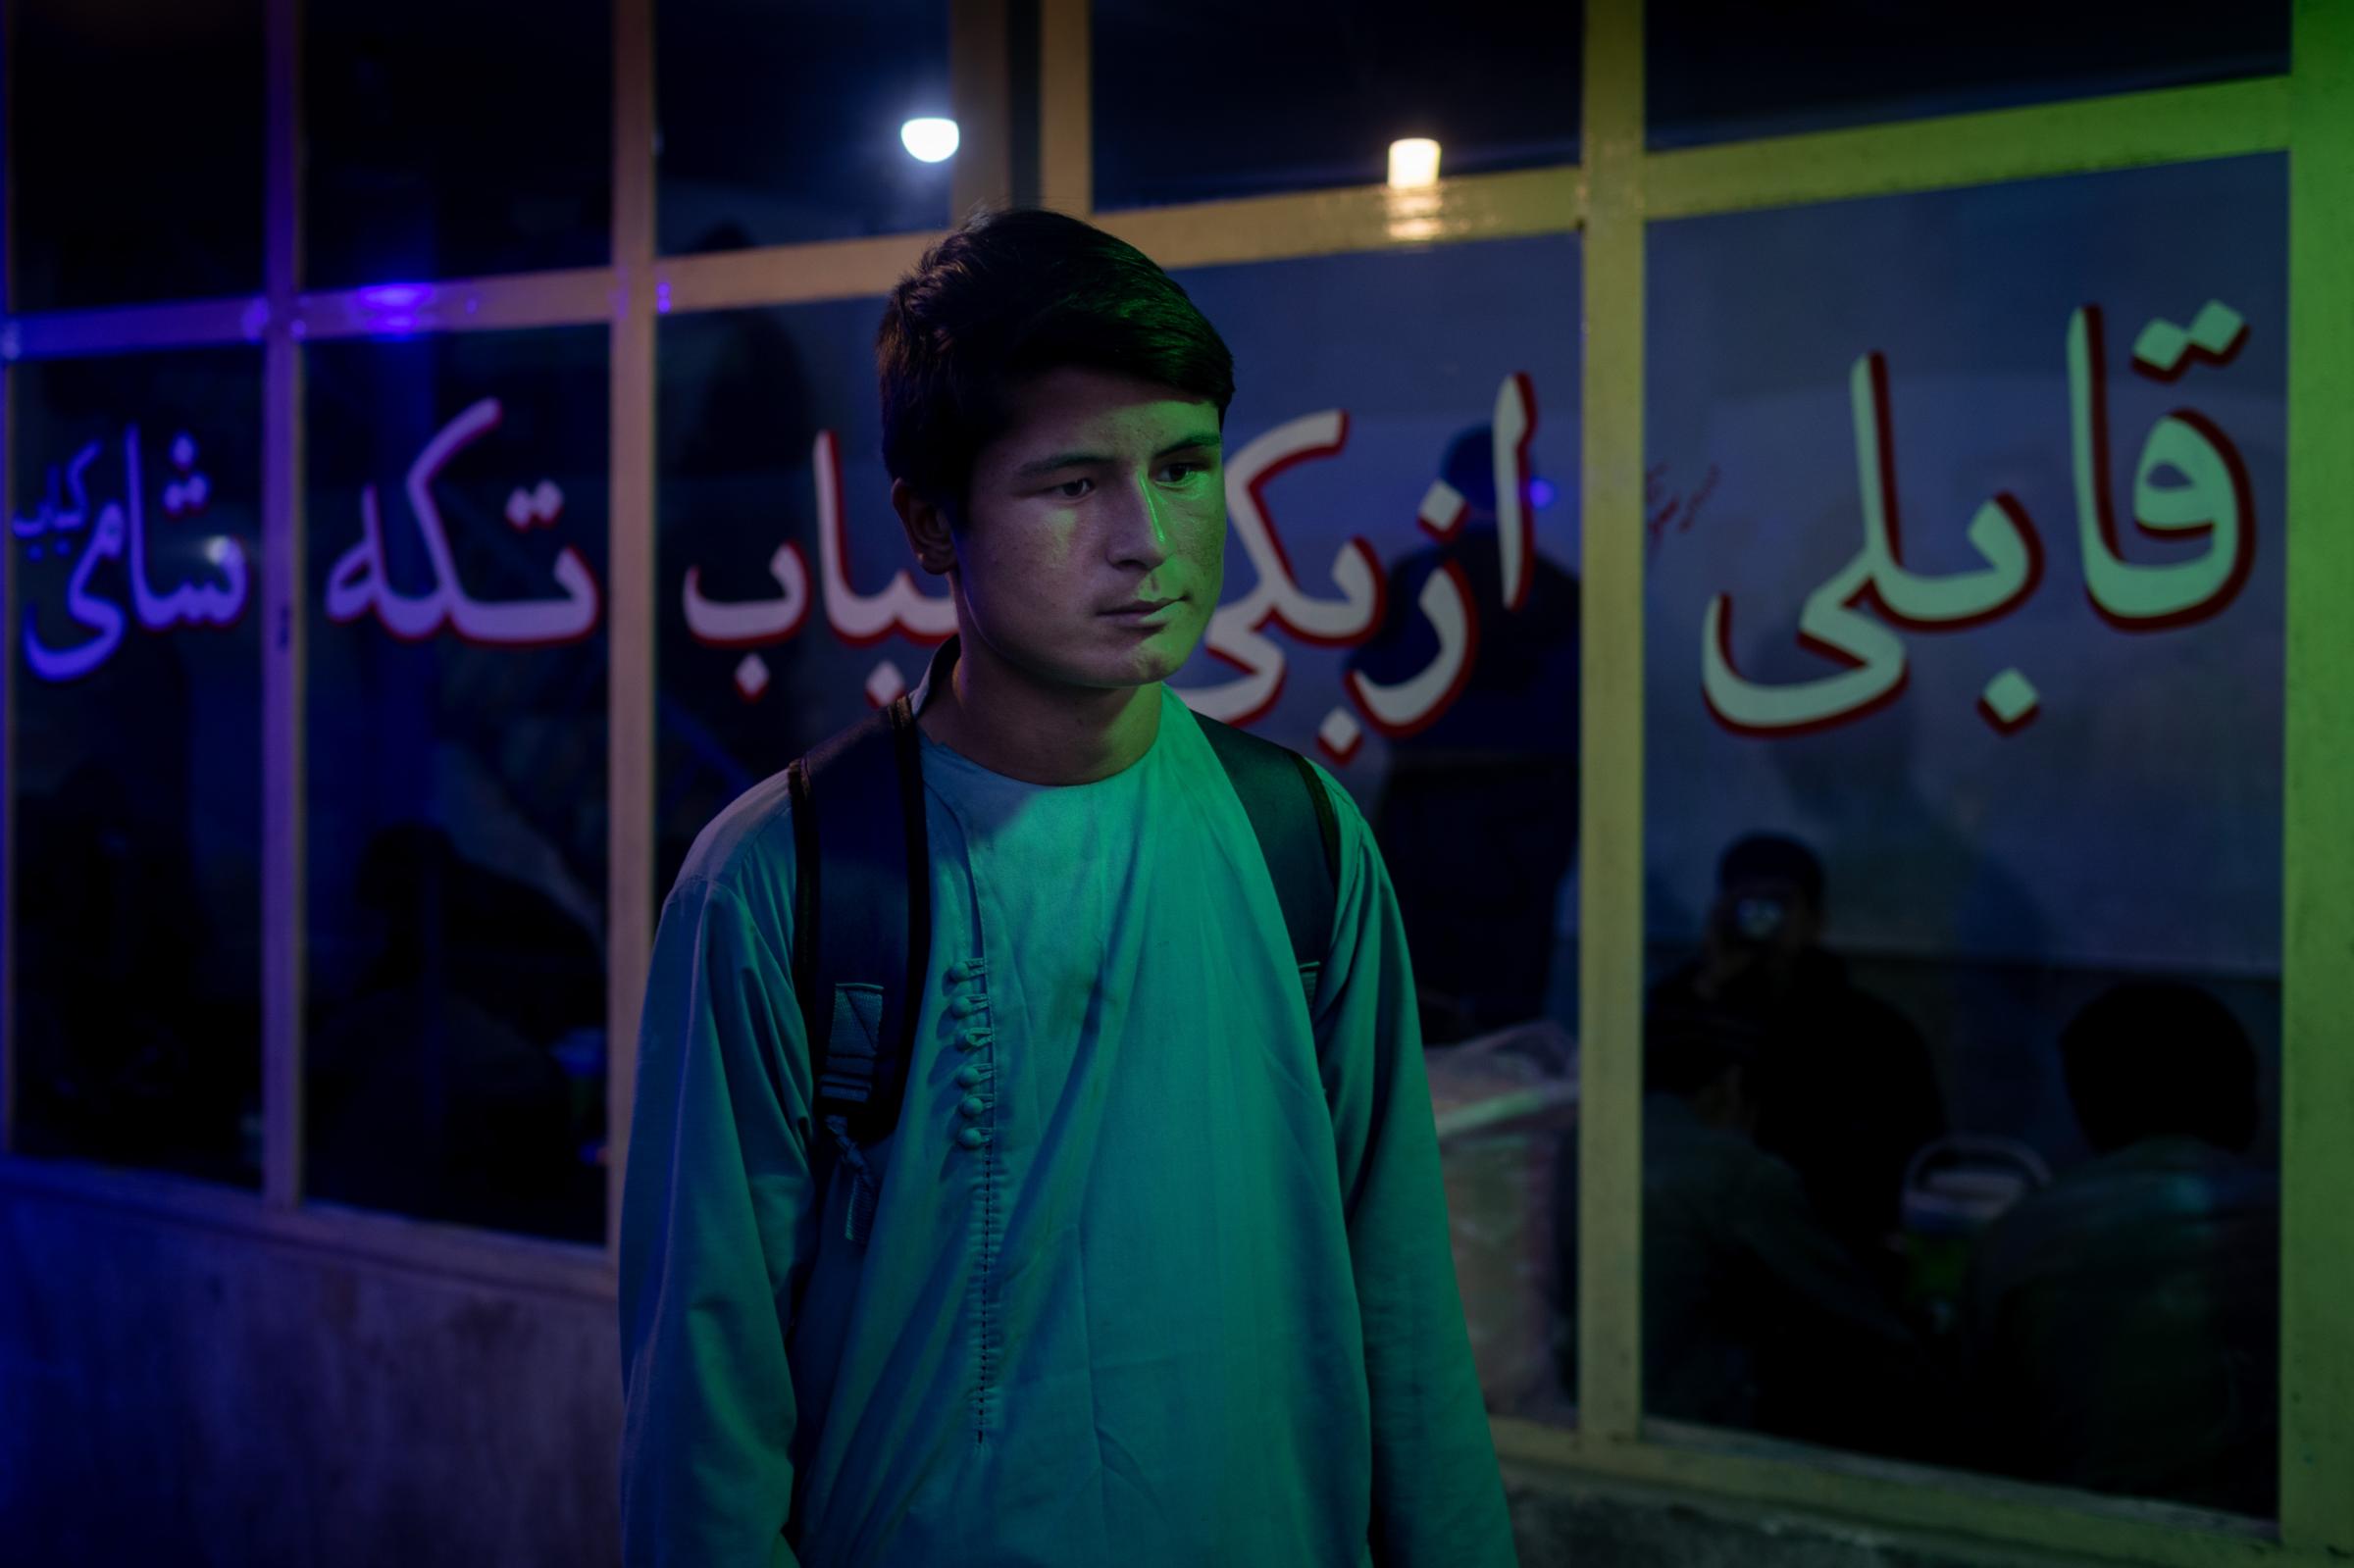 Shahabeddin, 17, from Kunduz stands at the bus station of the company area in Kabul. After trying...